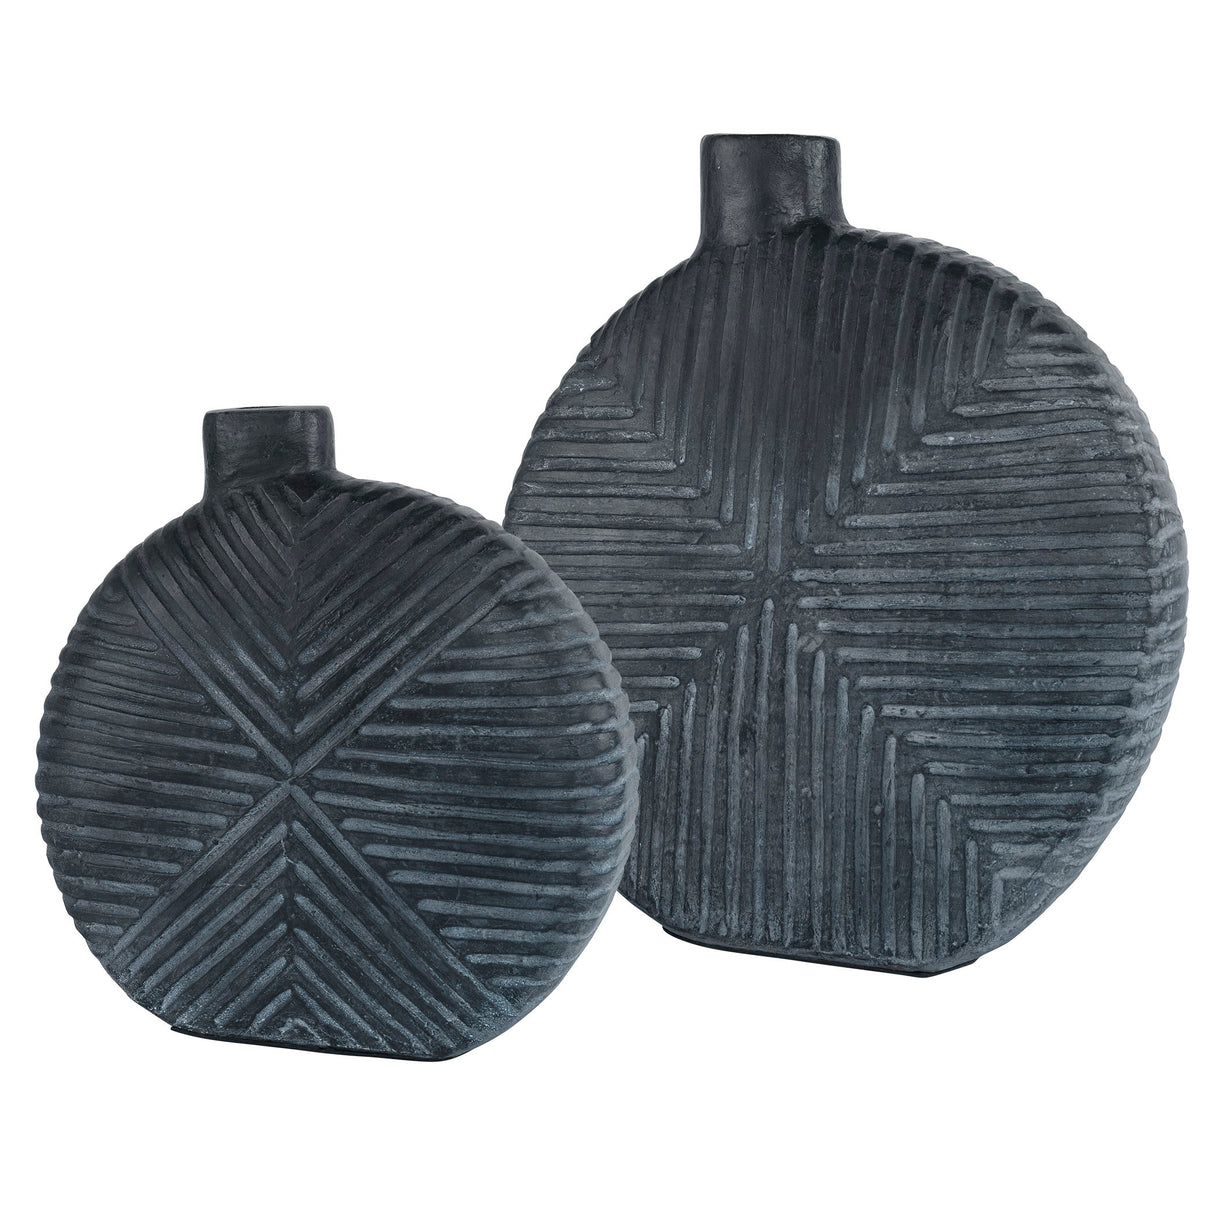 Viewpoint - Aged Black Vases (Set of 2)